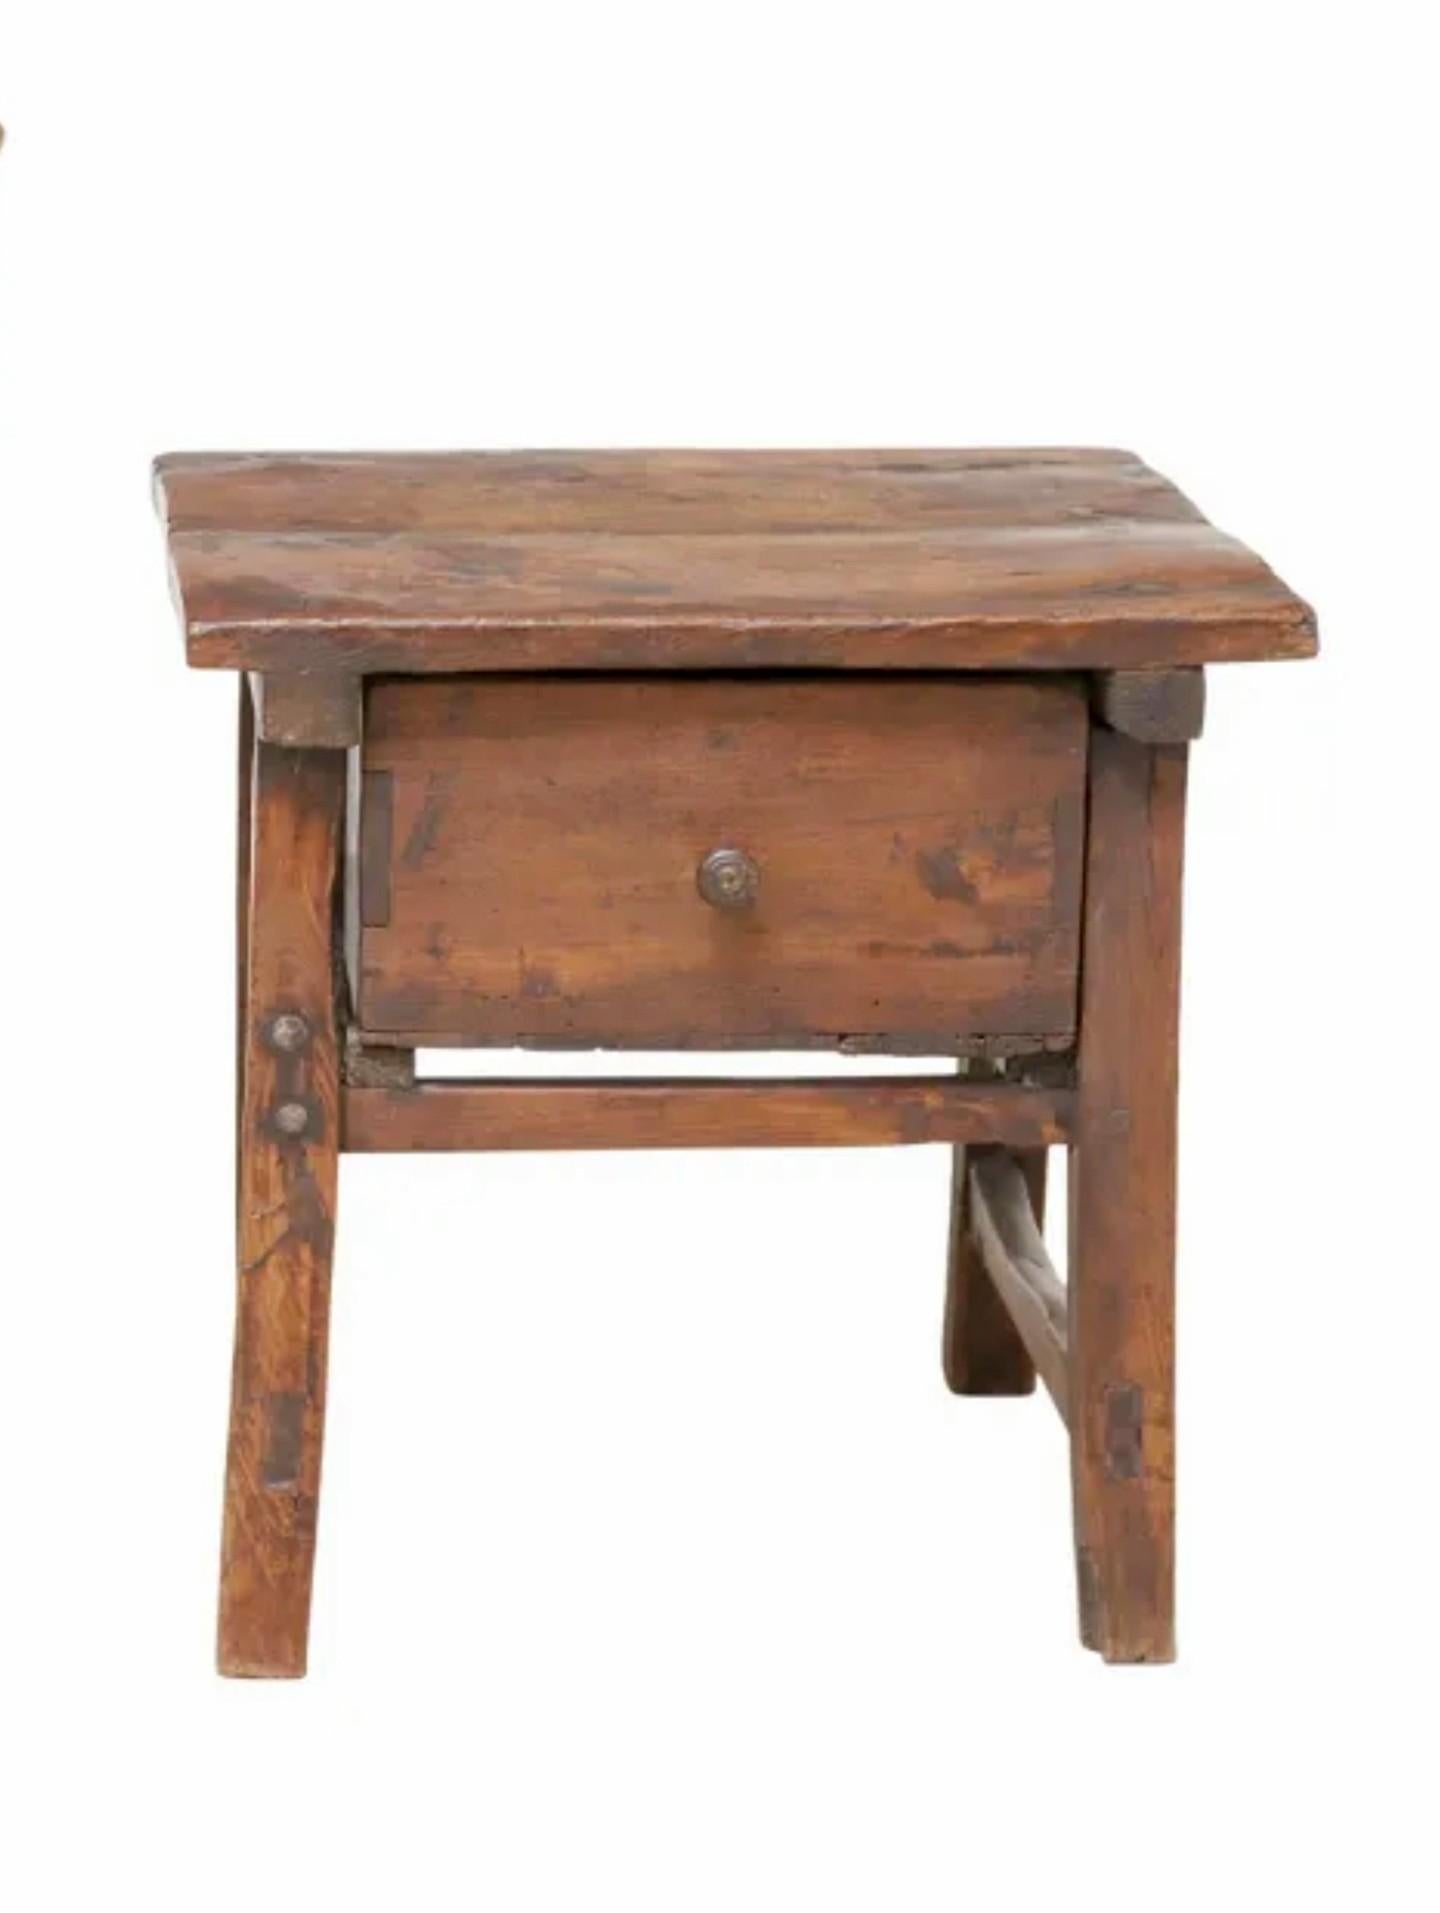 A rustic antique Spanish Colonial Baroque style walnut low table with beautifully aged warm distressed patina. 

Born in the second half of 18th century, primitive hand-crafted mortised solid walnut construction, having a rectangular two board